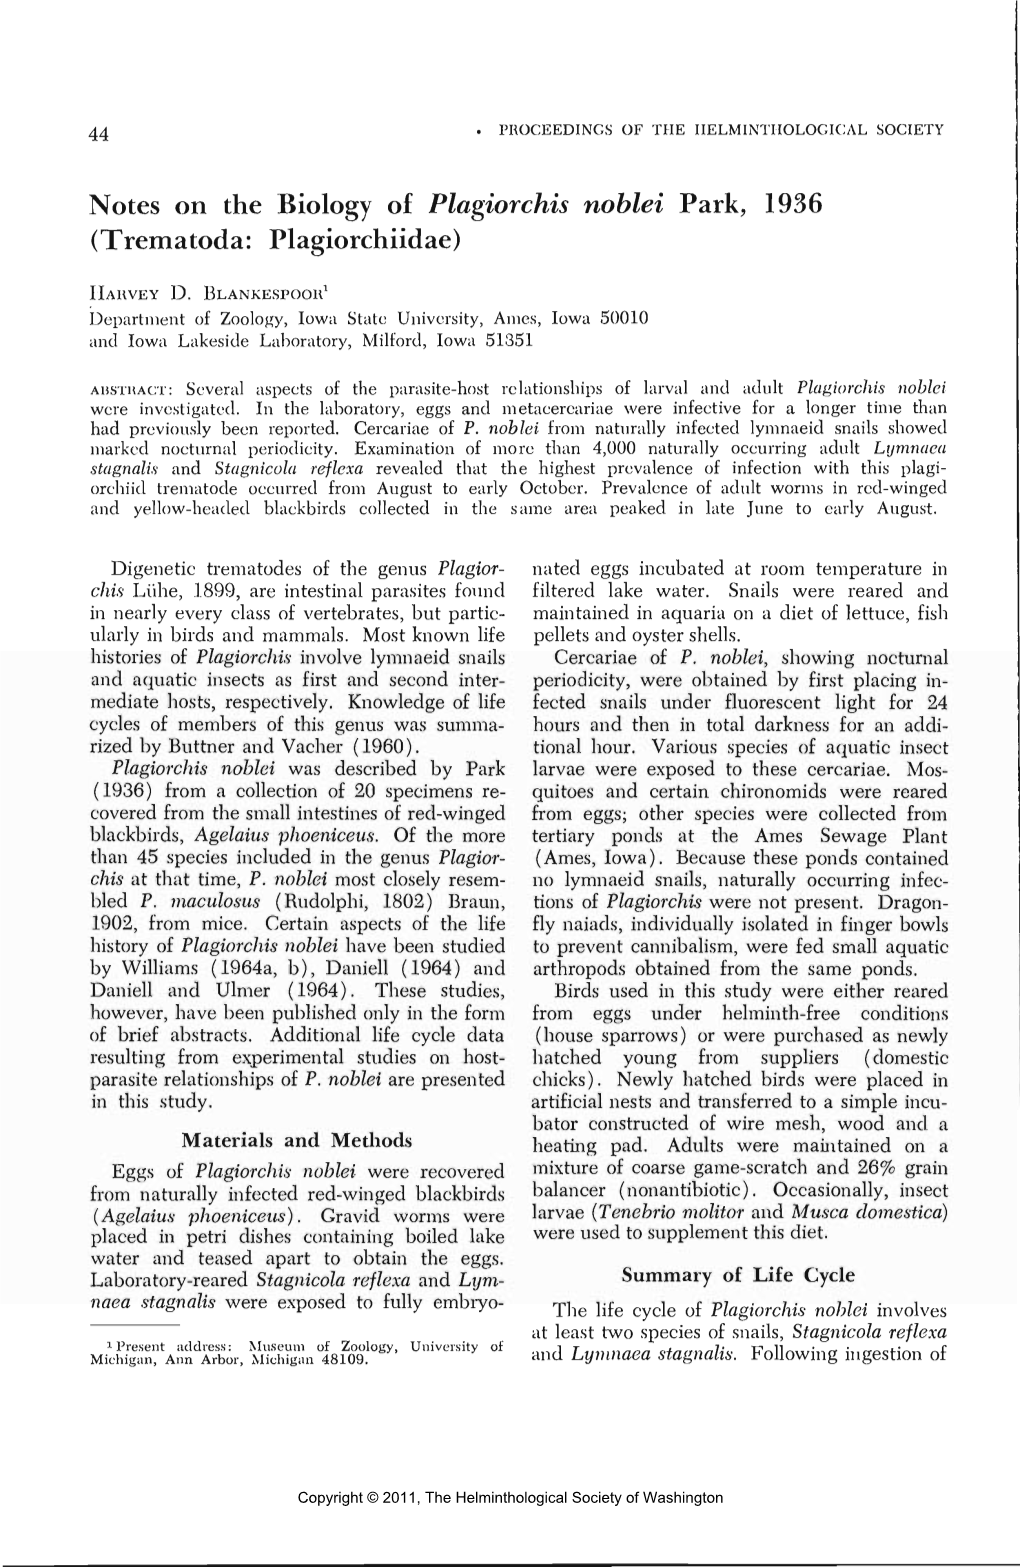 Notes on the Biology of Plagiorchis Noblei Park, 1936 (Trematoda: Plagiorchiidae)